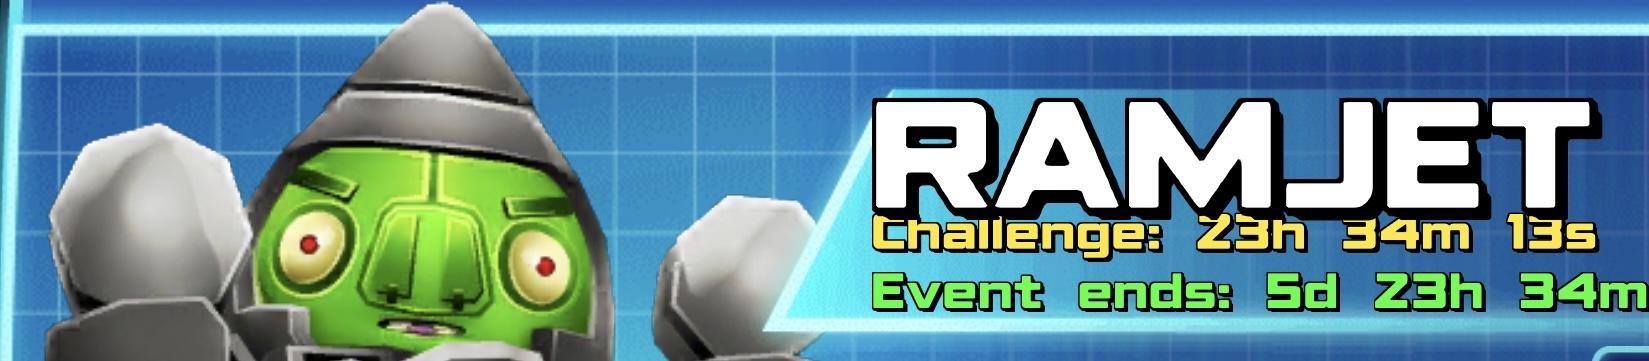 The event banner for Ramjet